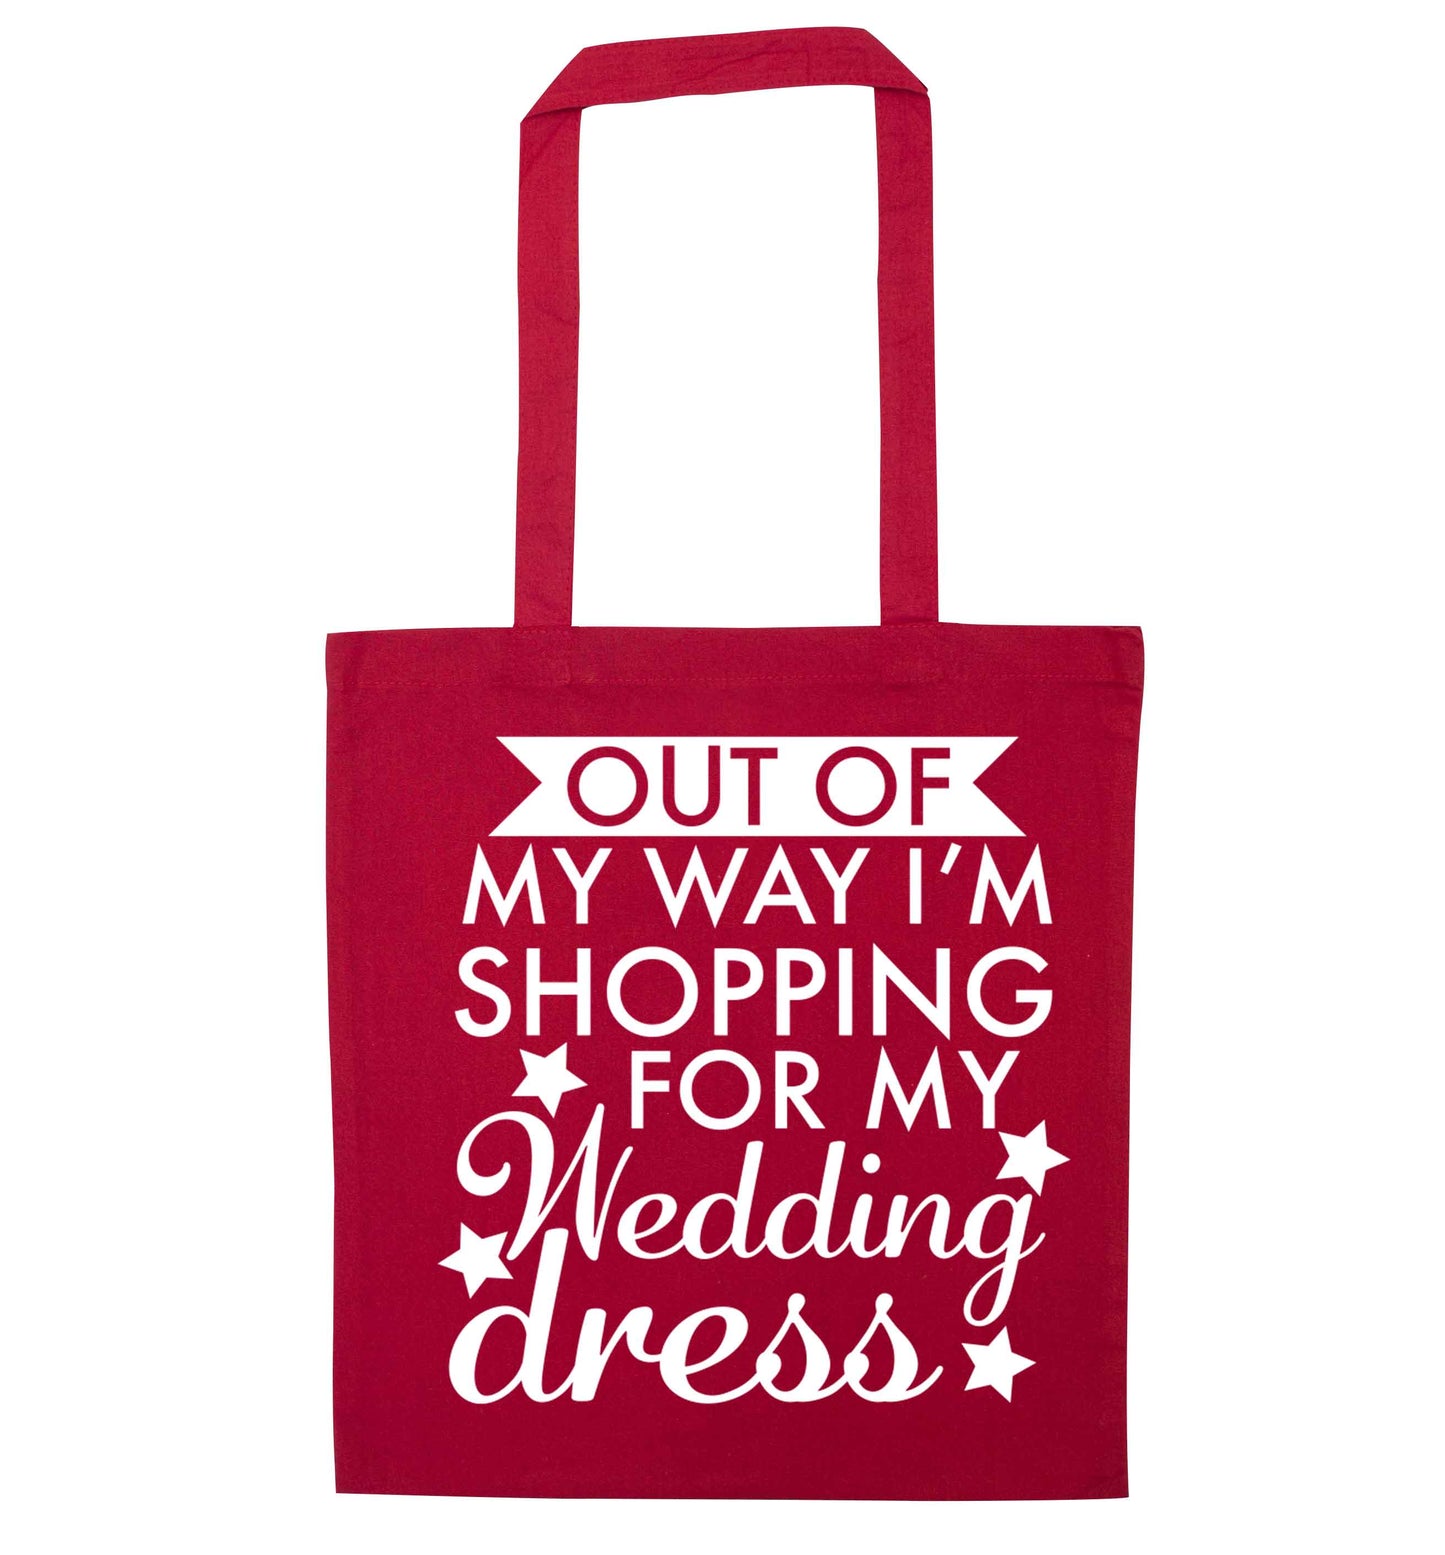 Out of my way I'm shopping for my wedding dress red tote bag